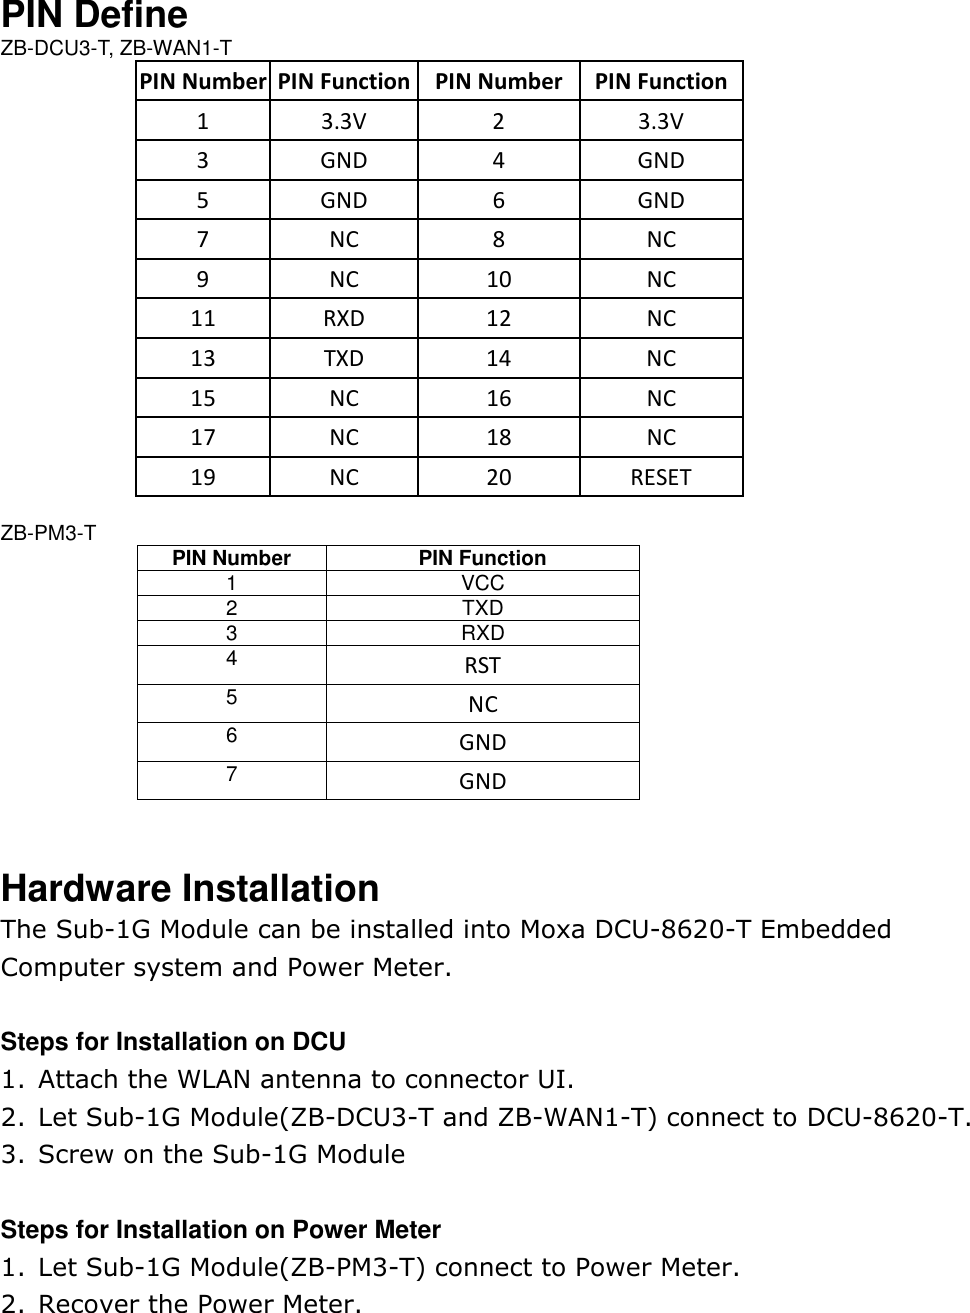 PIN Define ZB-DCU3-T, ZB-WAN1-T PIN Number PIN Function PIN Number PIN Function 1  3.3V  2  3.3V 3  GND  4  GND 5  GND  6  GND 7  NC  8  NC 9  NC  10  NC 11  RXD  12  NC 13  TXD  14  NC 15  NC  16  NC 17  NC  18  NC 19  NC  20  RESET  ZB-PM3-T PIN Number PIN Function 1  VCC 2  TXD 3  RXD 4 RST 5 NC 6 GND 7 GND   Hardware Installation The Sub-1G Module can be installed into Moxa DCU-8620-T Embedded Computer system and Power Meter.  Steps for Installation on DCU 1. Attach the WLAN antenna to connector UI. 2. Let Sub-1G Module(ZB-DCU3-T and ZB-WAN1-T) connect to DCU-8620-T. 3. Screw on the Sub-1G Module  Steps for Installation on Power Meter 1. Let Sub-1G Module(ZB-PM3-T) connect to Power Meter. 2. Recover the Power Meter.     